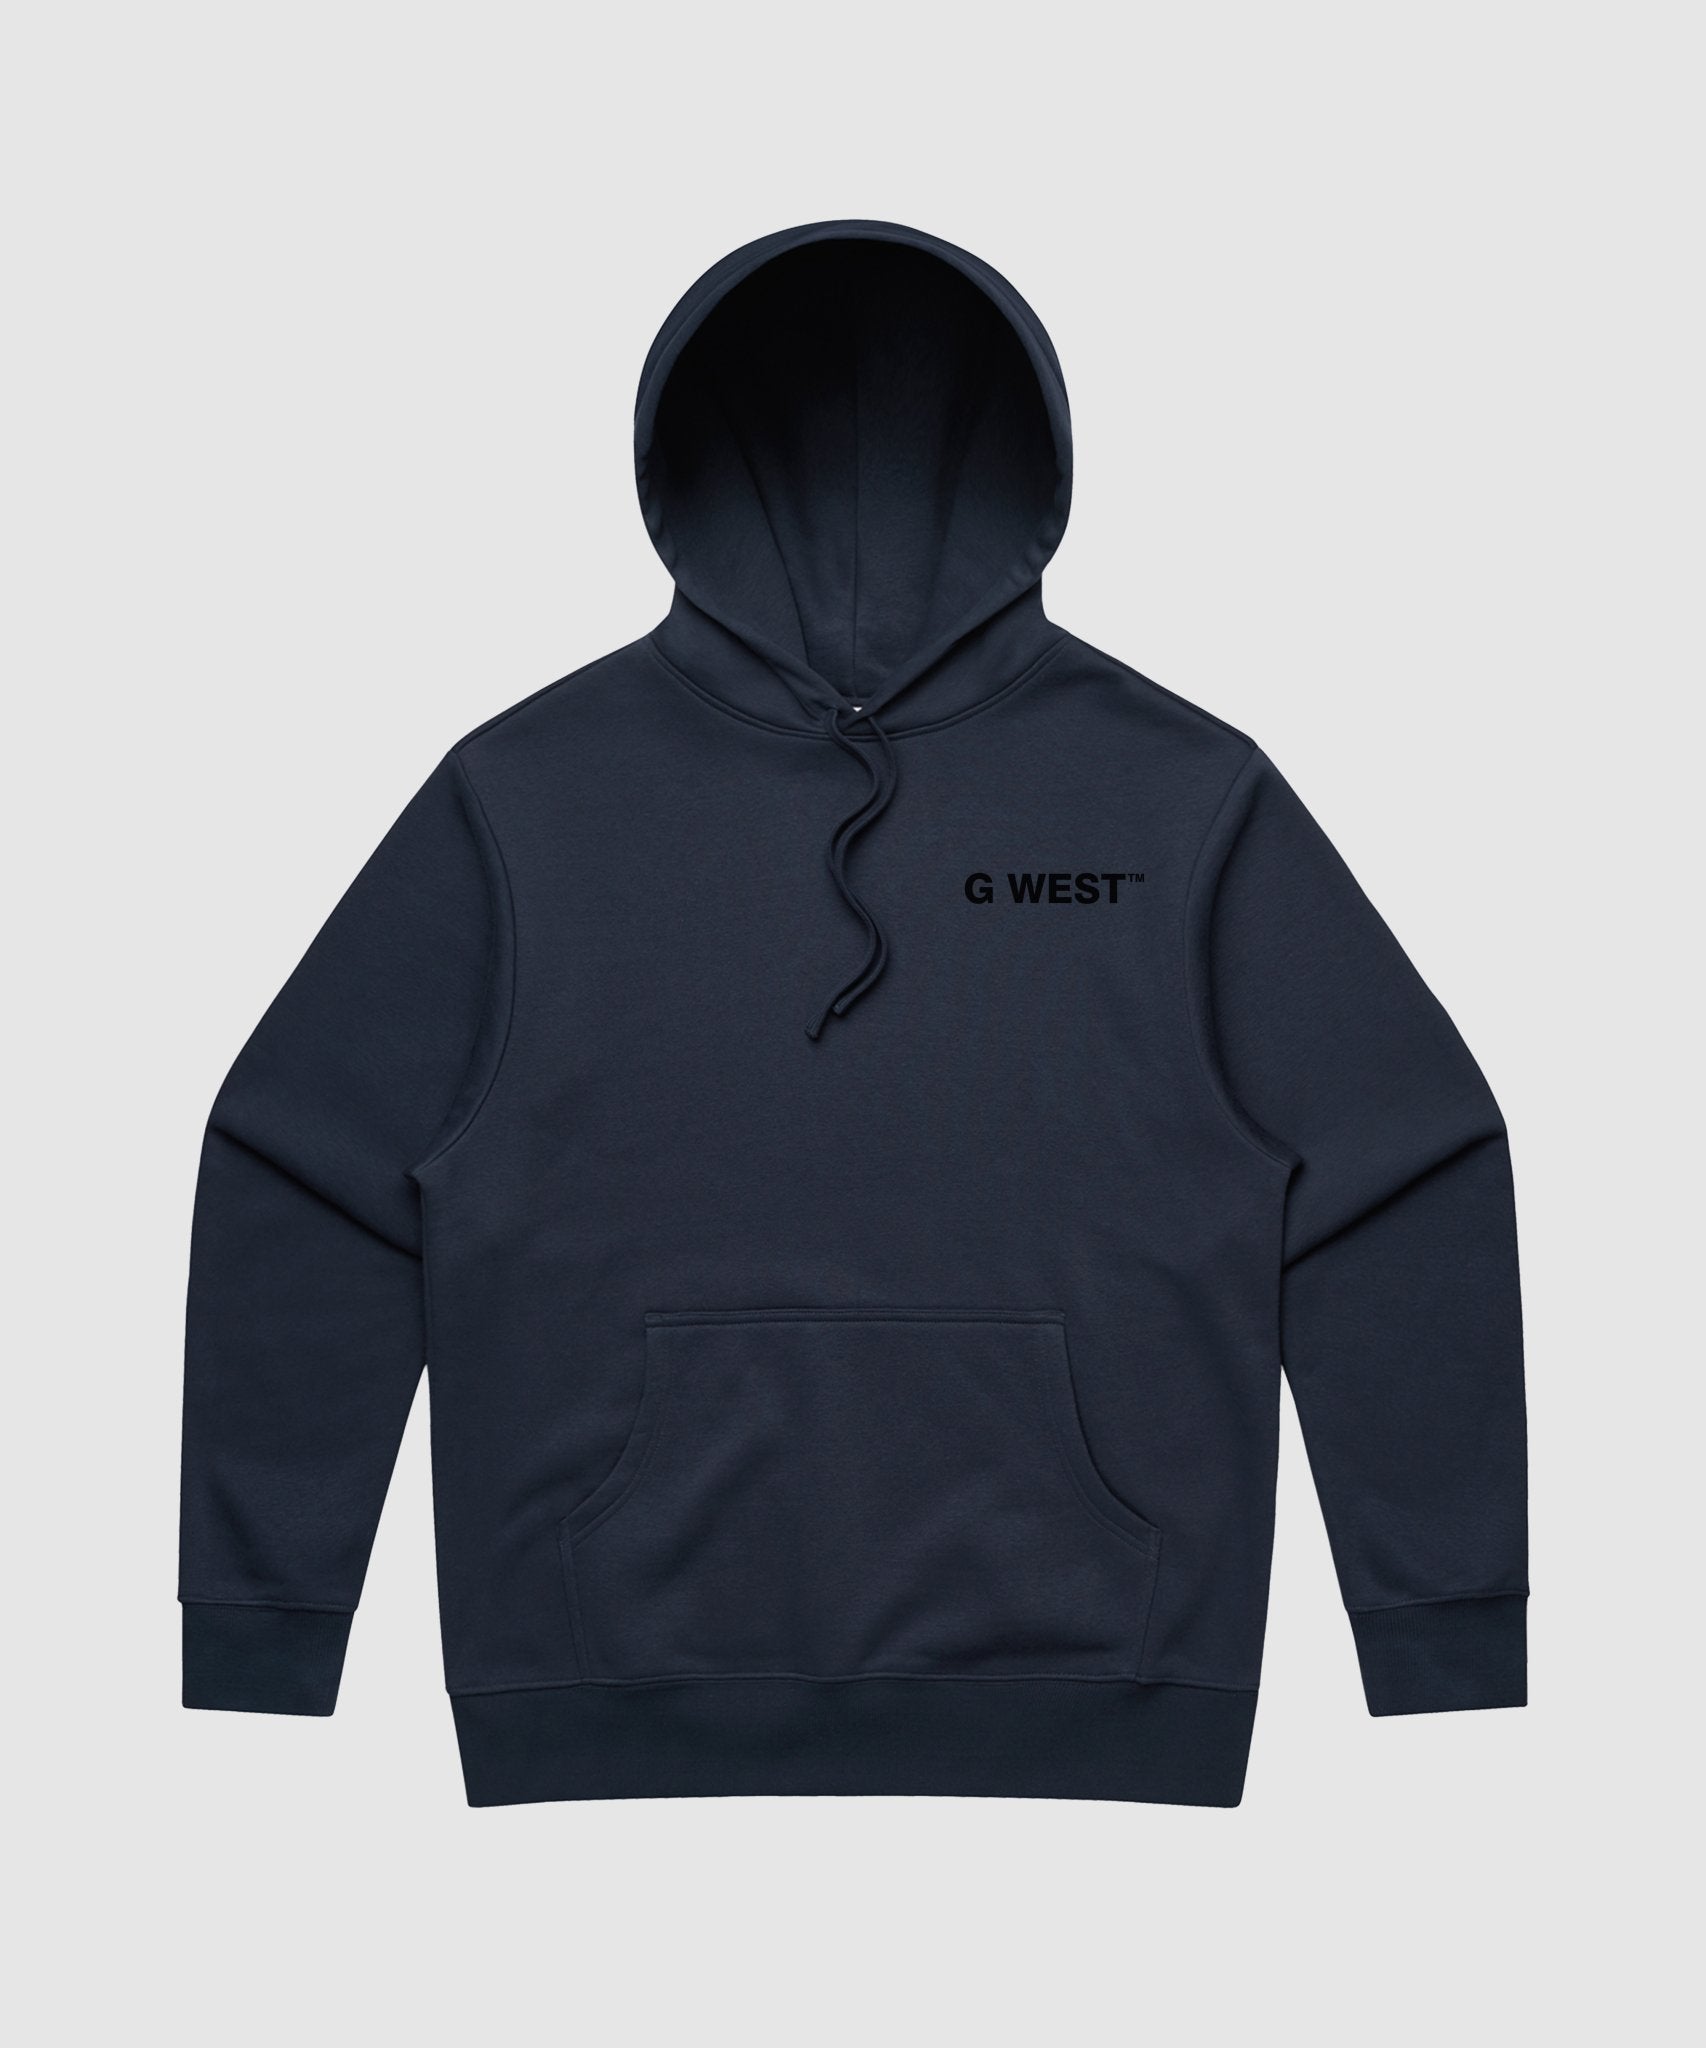 G WEST BLUEBERRY MOHITO HEAVY PREMIUM HOODIE - G West